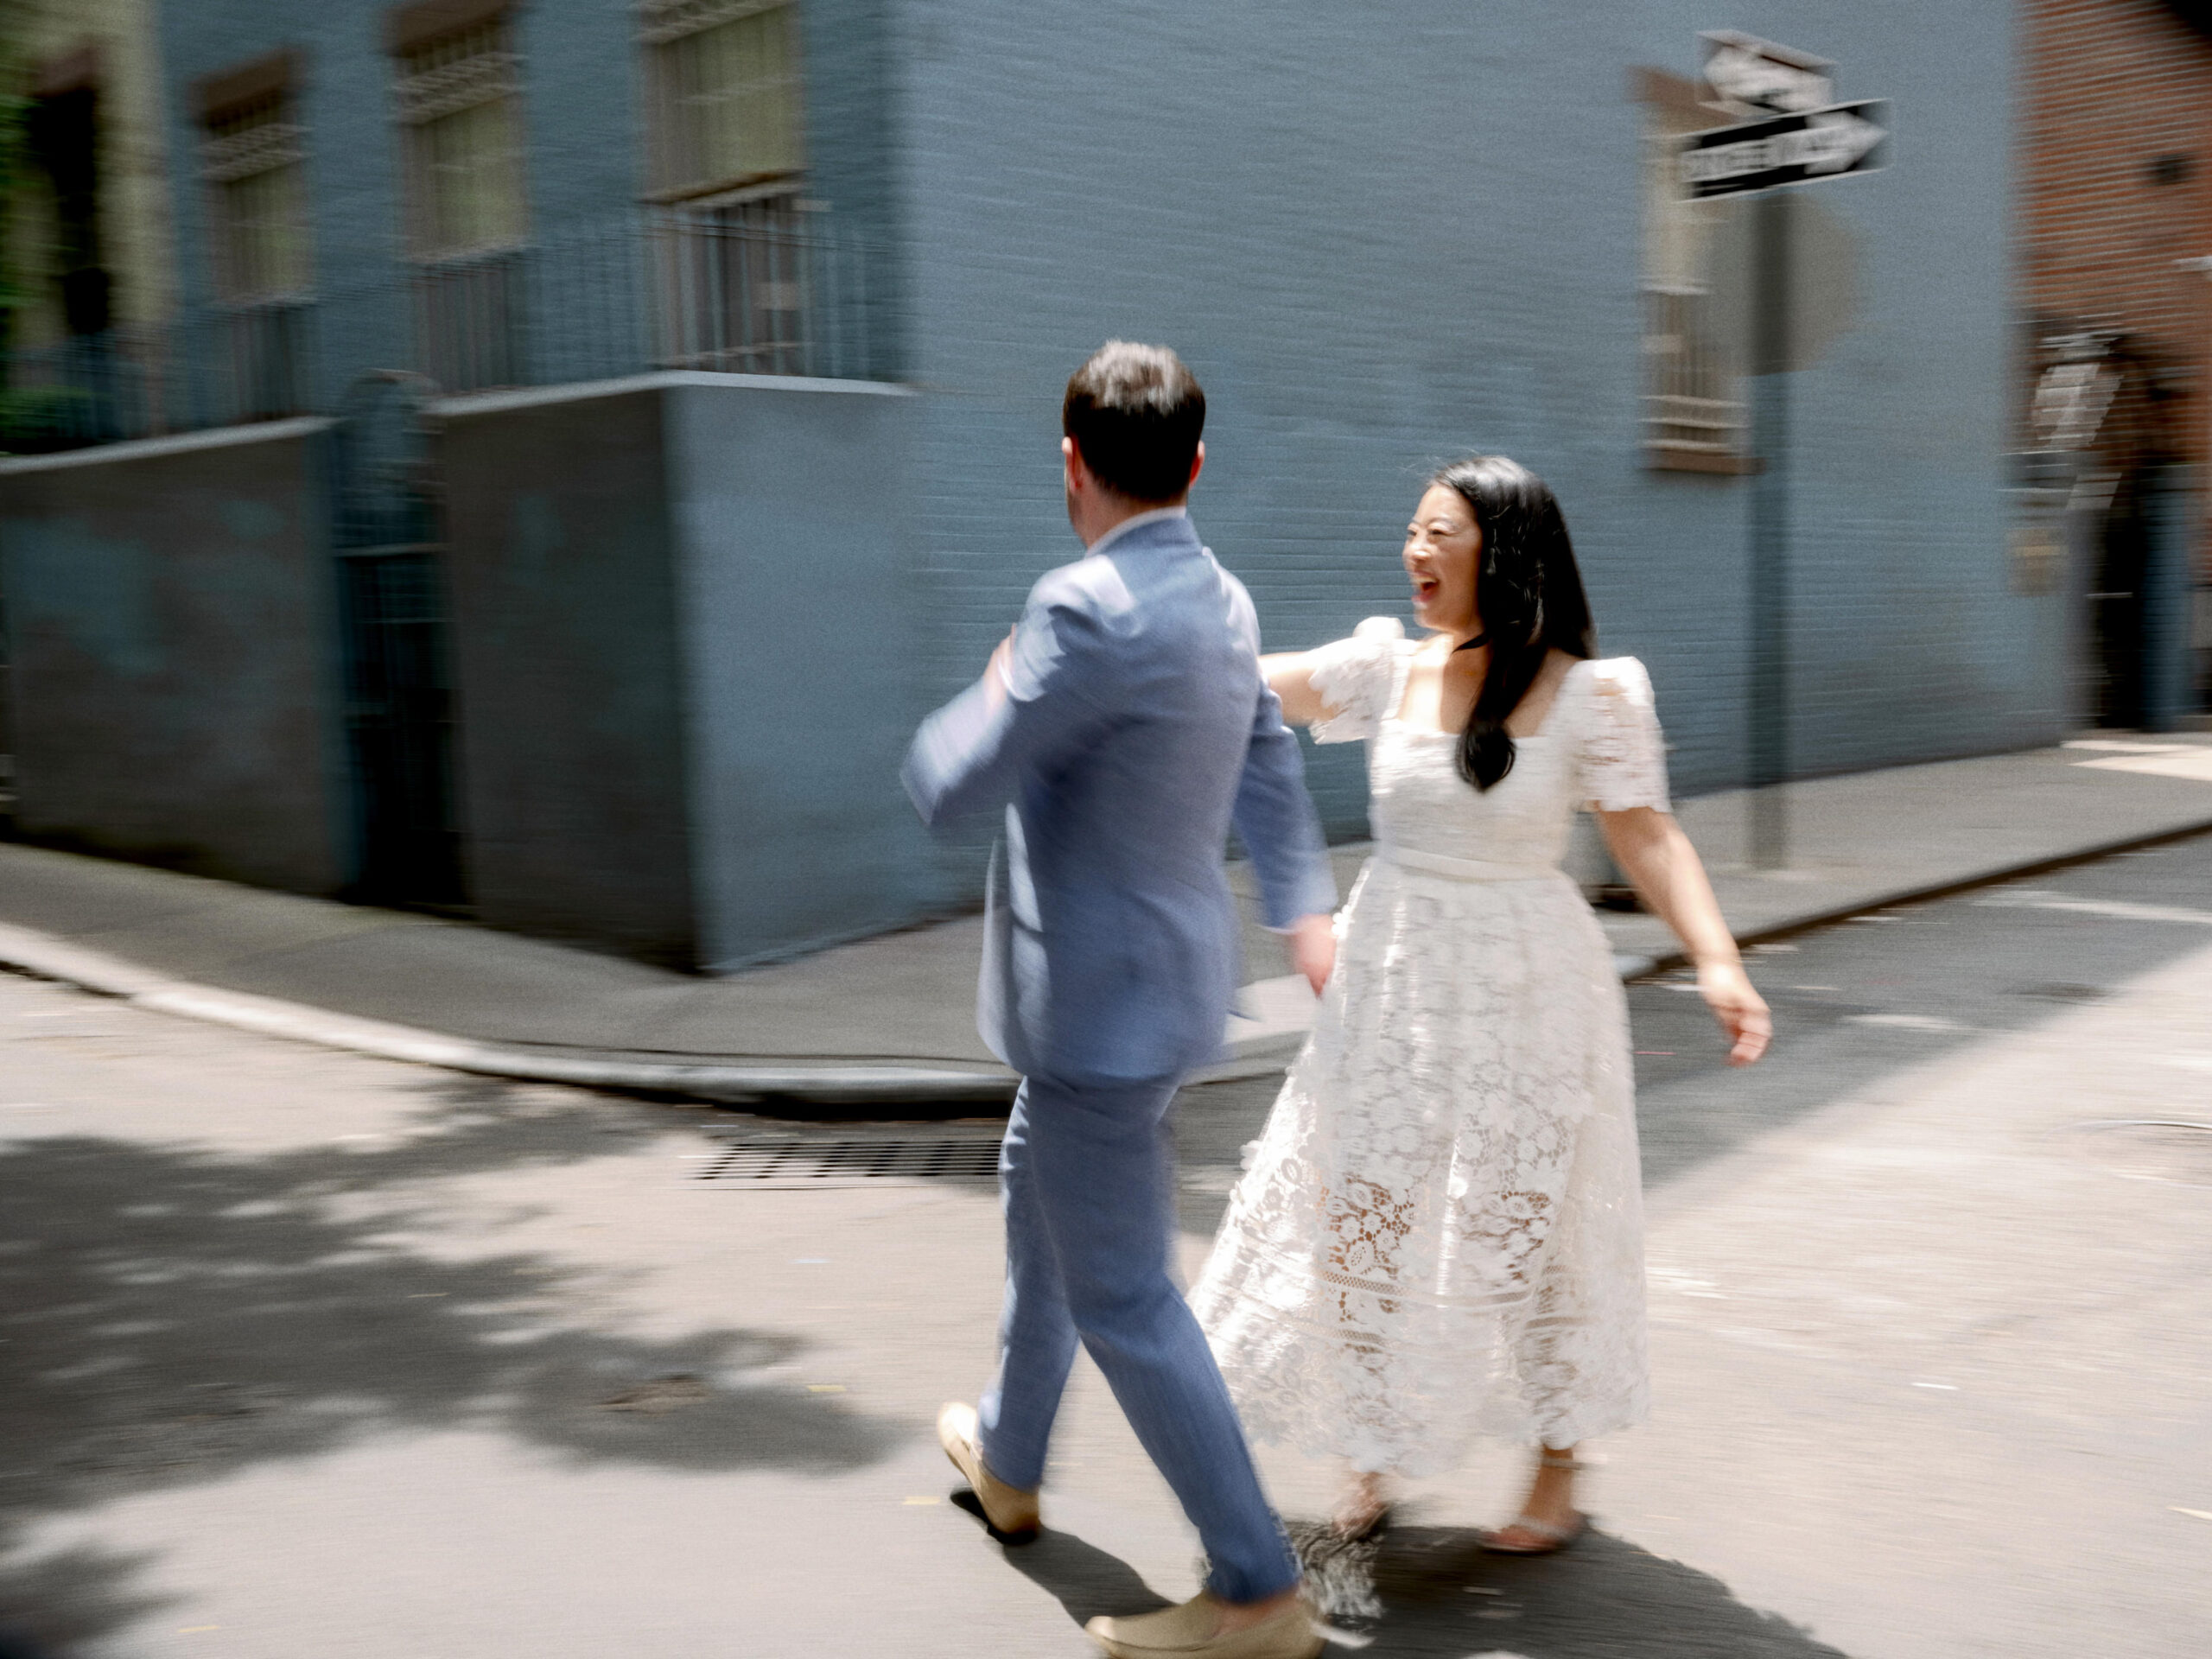 The engaged couple are happily dancing in the streets of New York. Engagement photos image by Jenny Fu Studio